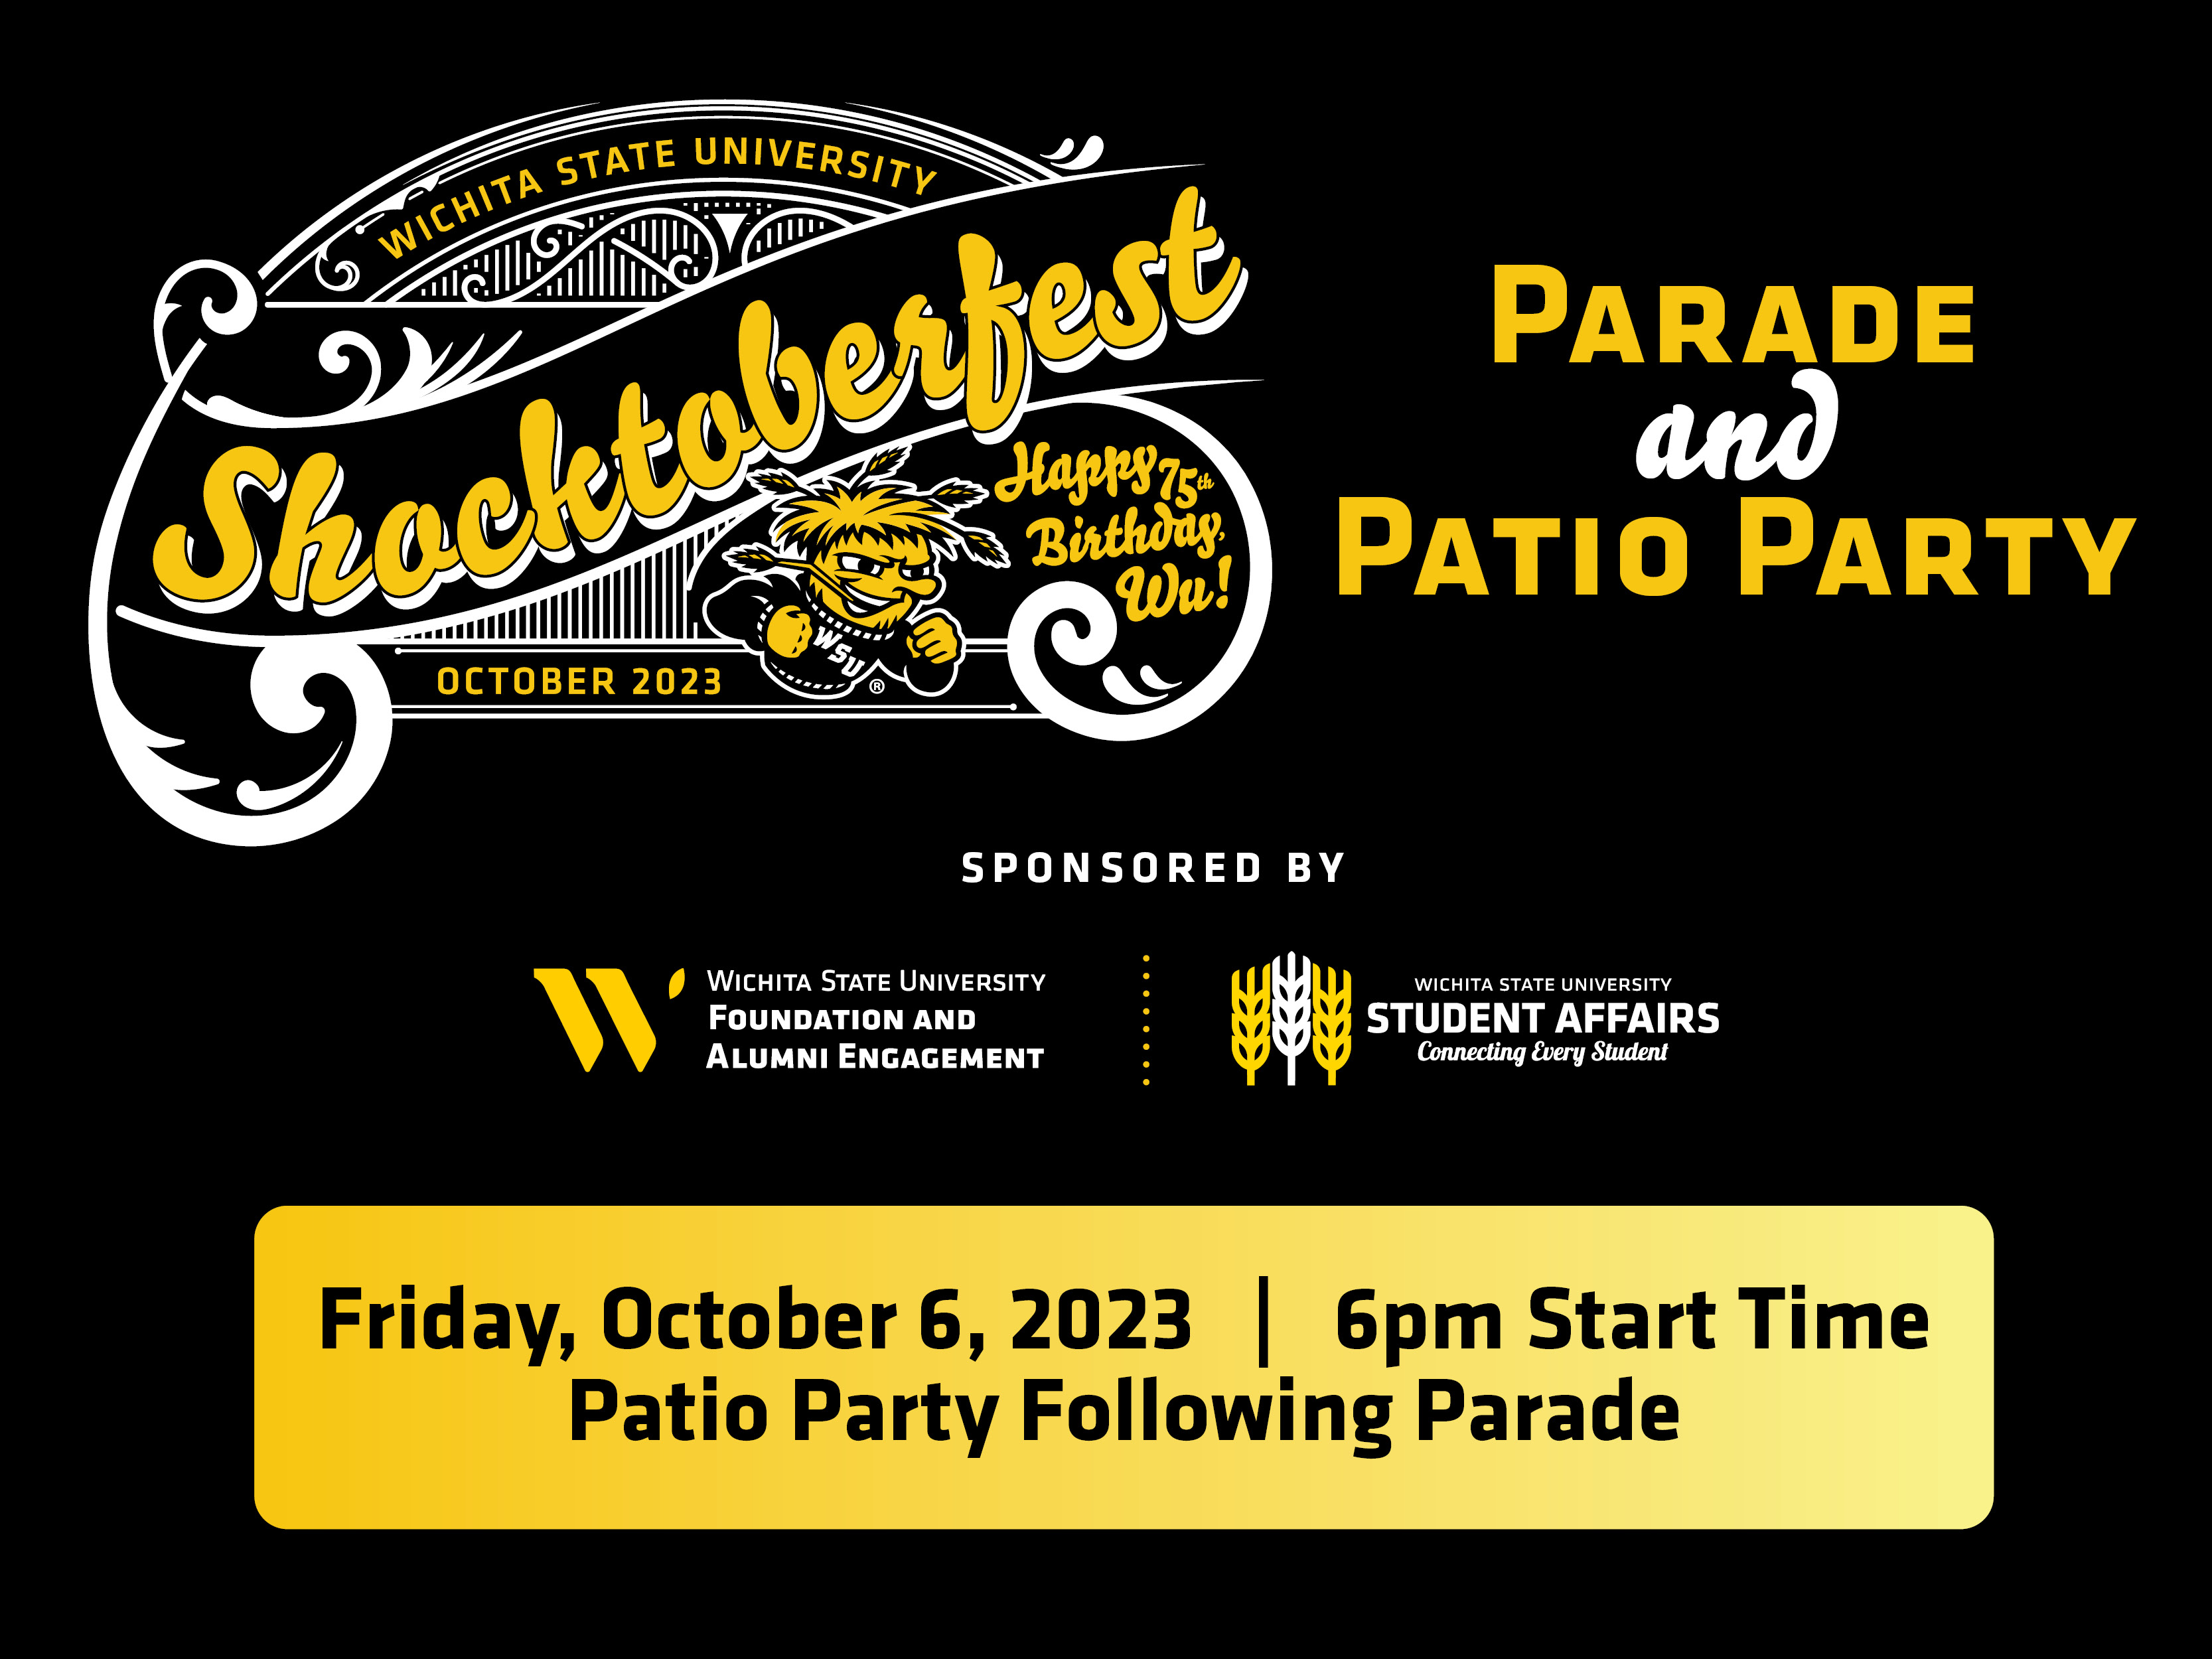 Wichita State University Shocktoberfest Parade and Patio Party sponsored by Wichita State University Foundation & Alumni Engagement and Student Affairs. Event Friday, October 6, 2023. Start time 6 p.n. with patio party following the parade